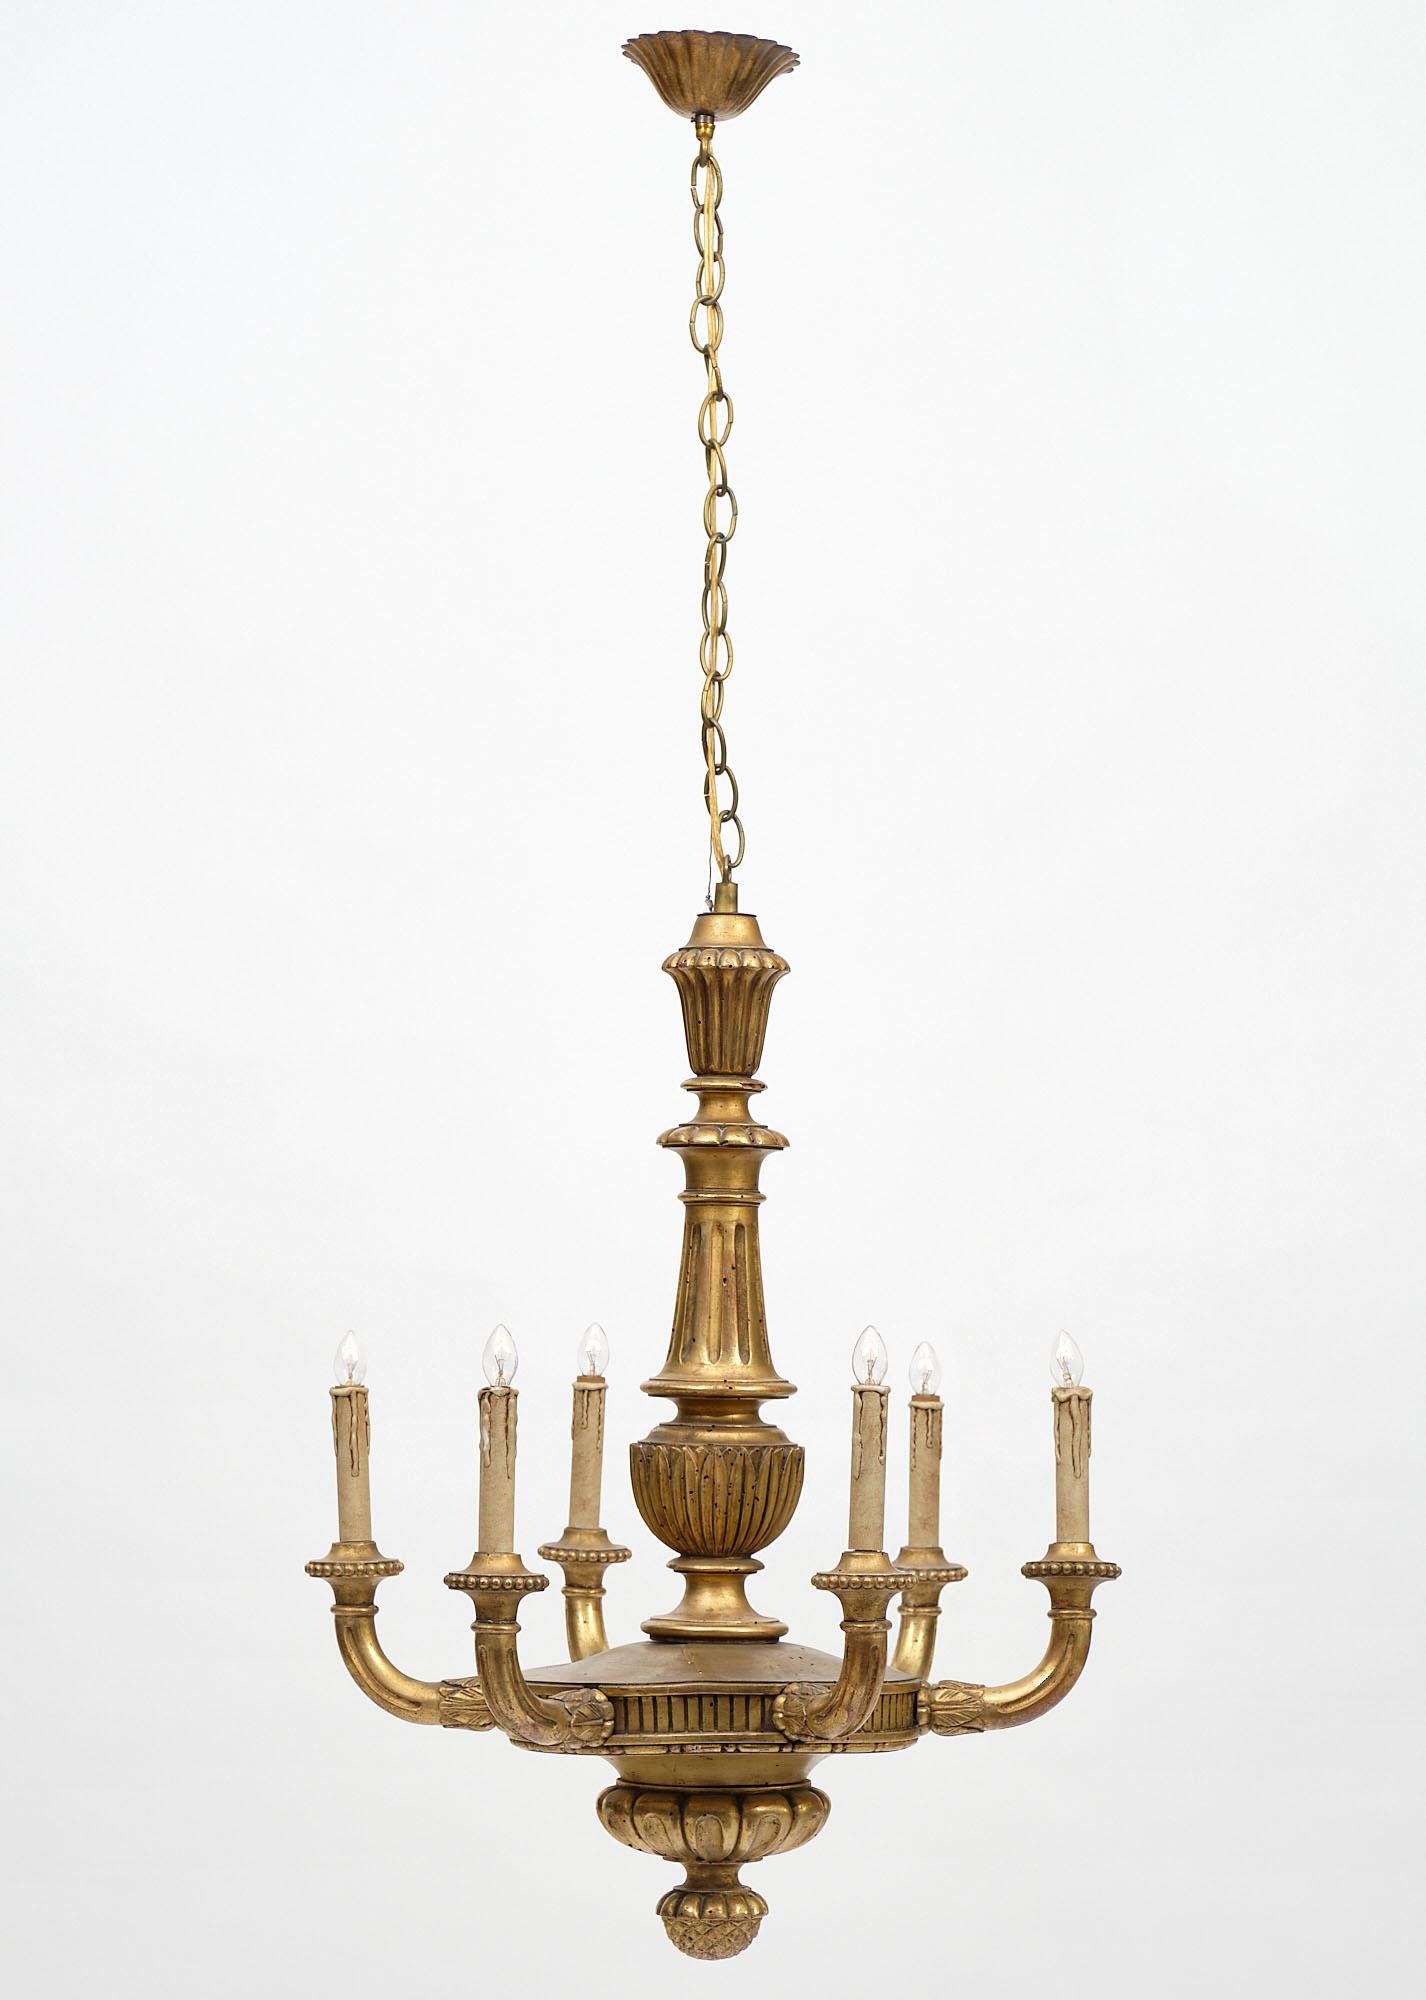 Gorgeous antique French Louis XIV style chandelier in hand carved and gold leafed wood, acanthus leaf details, pine cone finial, rewired.